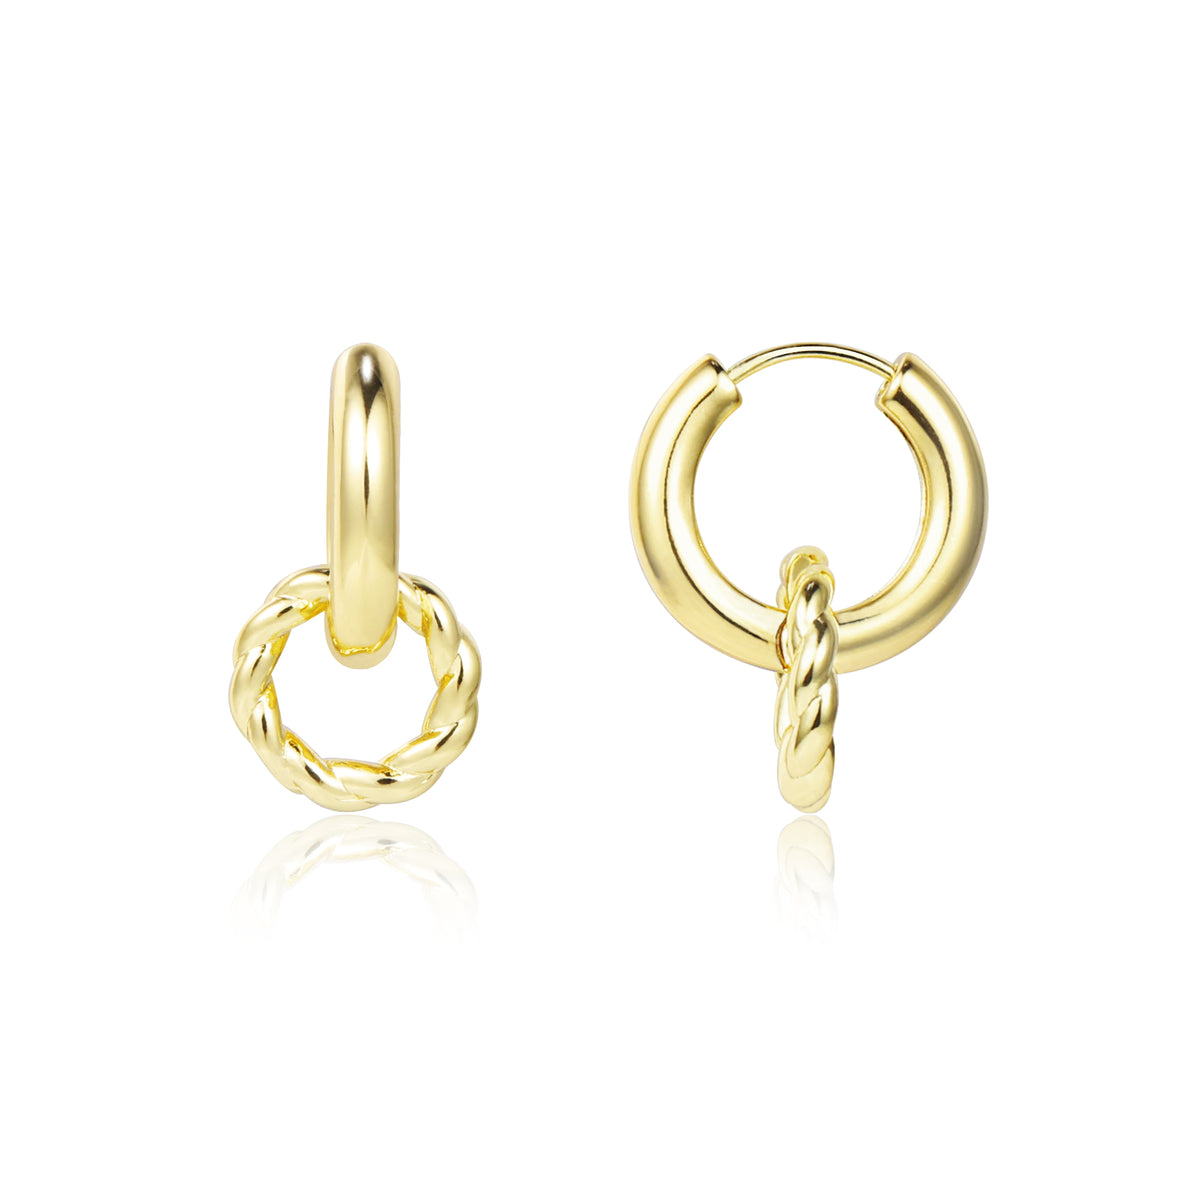  BOUTIQUELOVIN 14K Gold Plated Chunky Hoop Earrings for